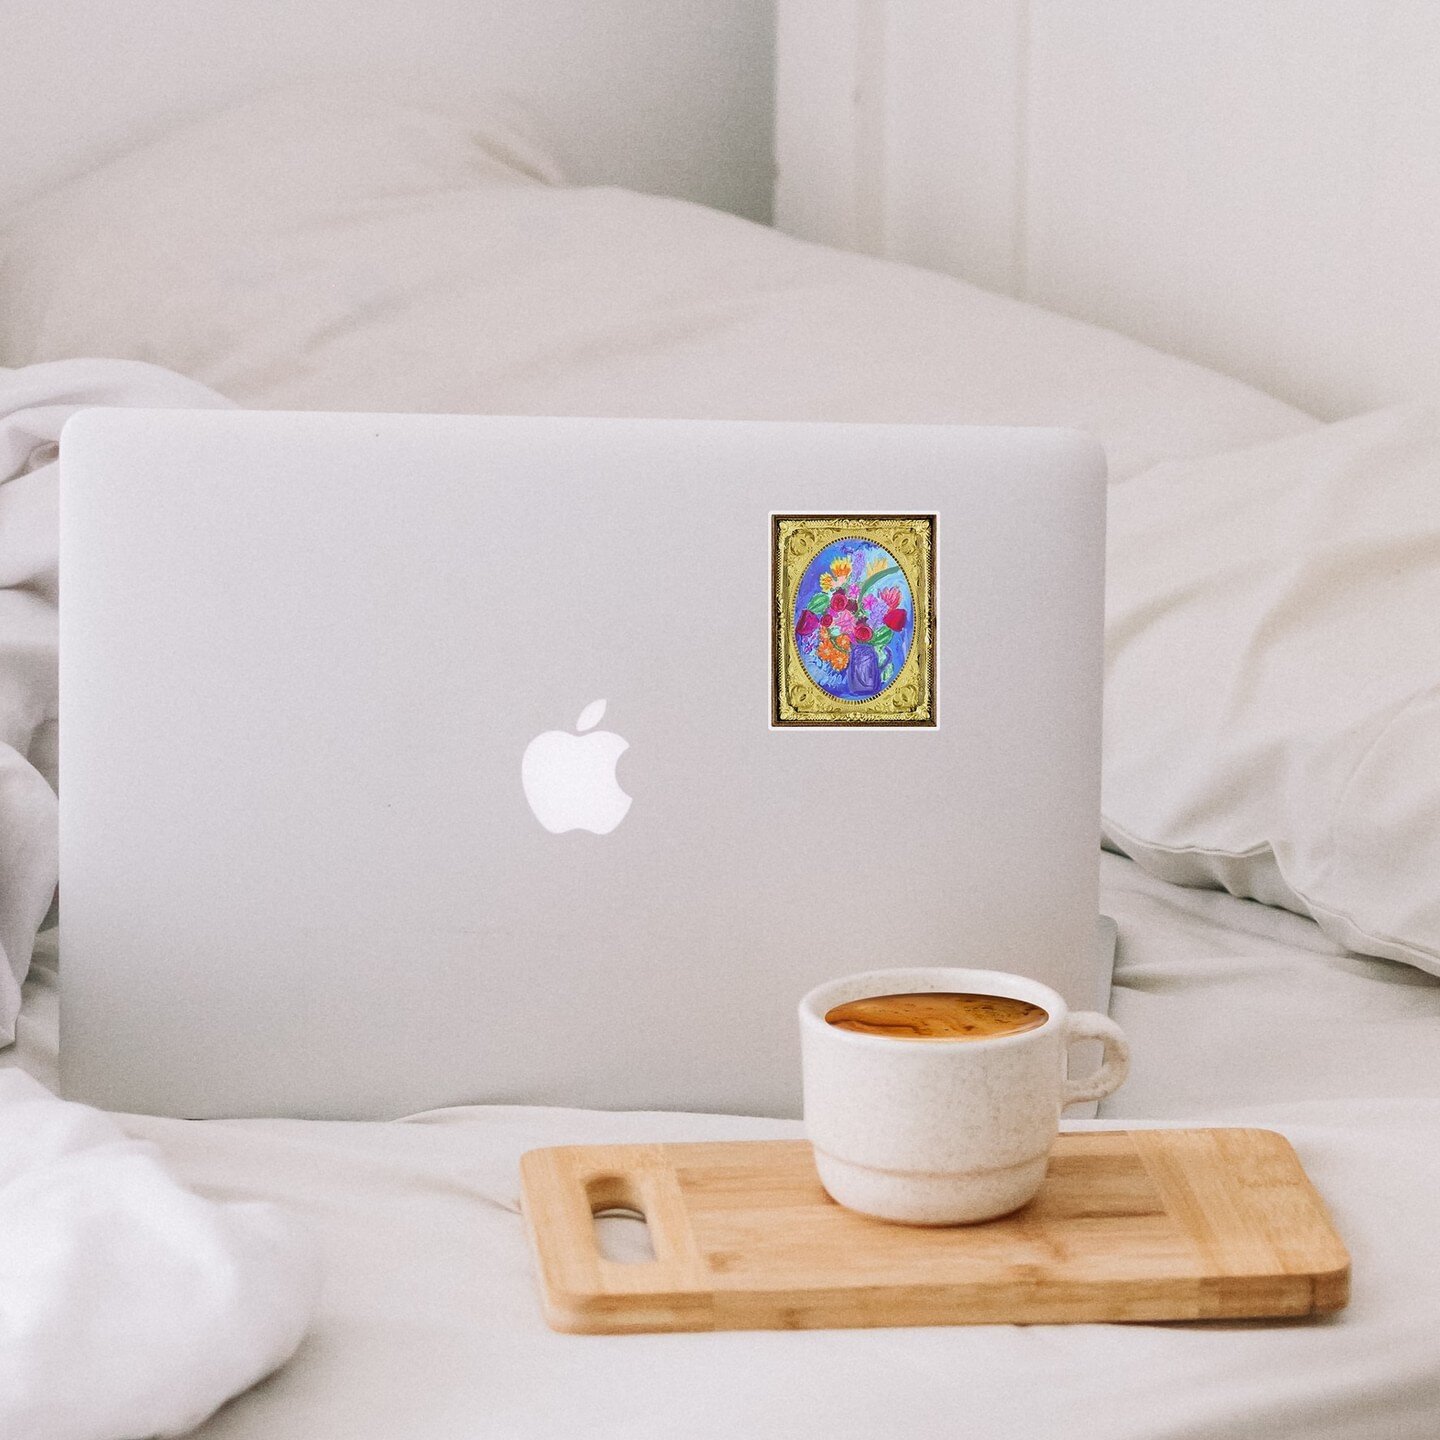 I love how this sticker makes your laptop/water bottle into a mini art gallery! How fun!! ⁠
.⁠
.⁠
.⁠
.⁠
.⁠
.⁠
.⁠
This illustration is available as stickers for wholesale on @faire_wholesale so if you want some fun stickers to sell in your store pleas